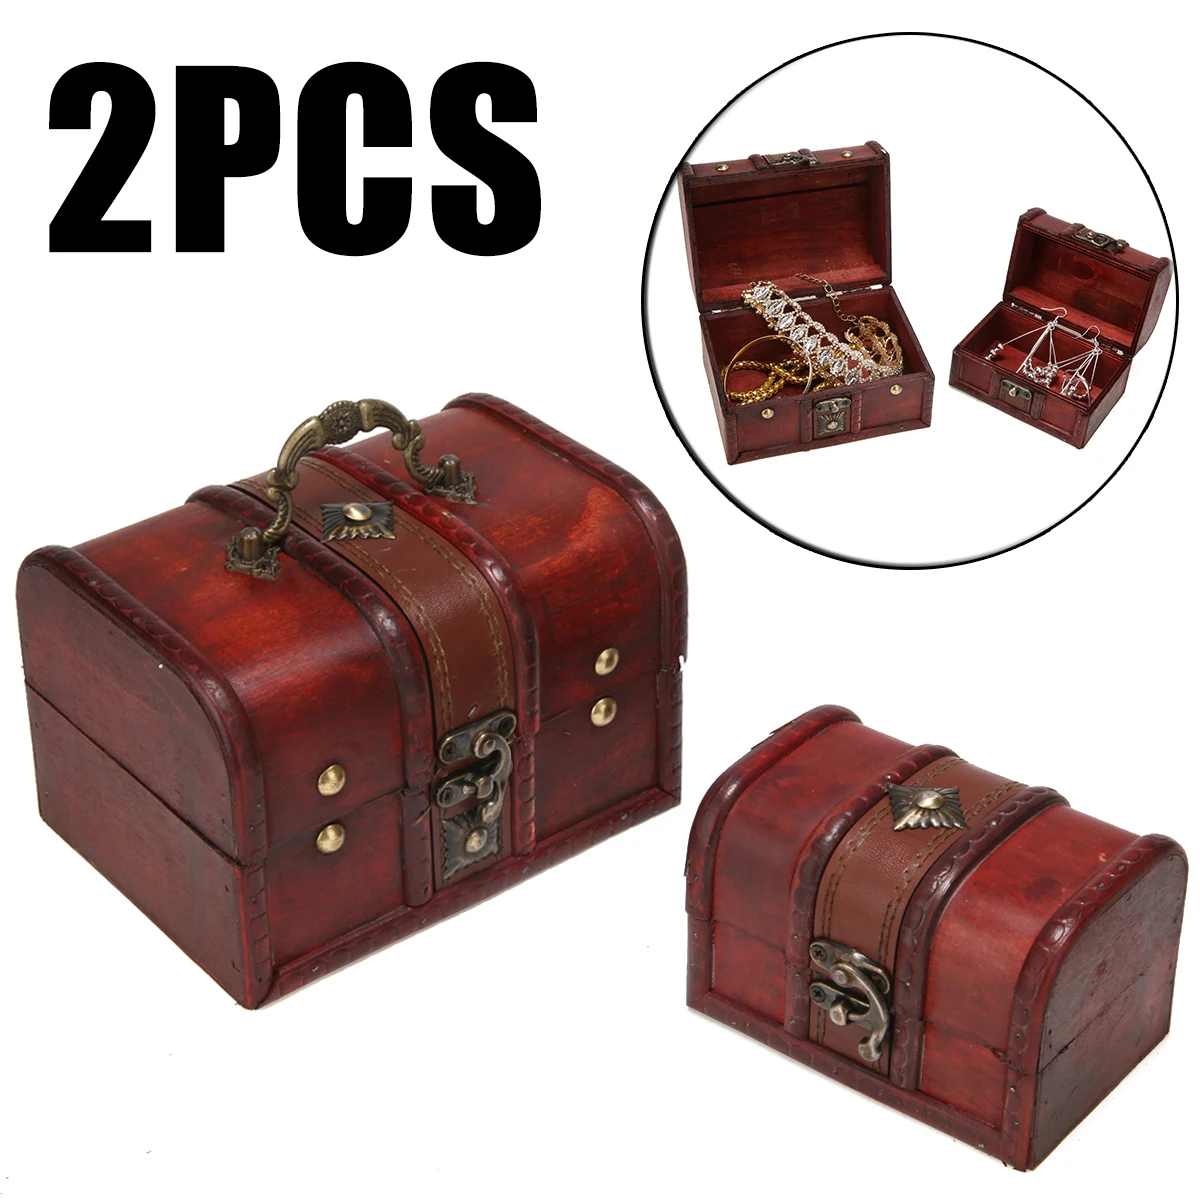 Mayitr 2Pcs Vintage Wooden Jewelry Storage Box Small Treasure Chest Wood Crate Case For Home Craft Storage Container